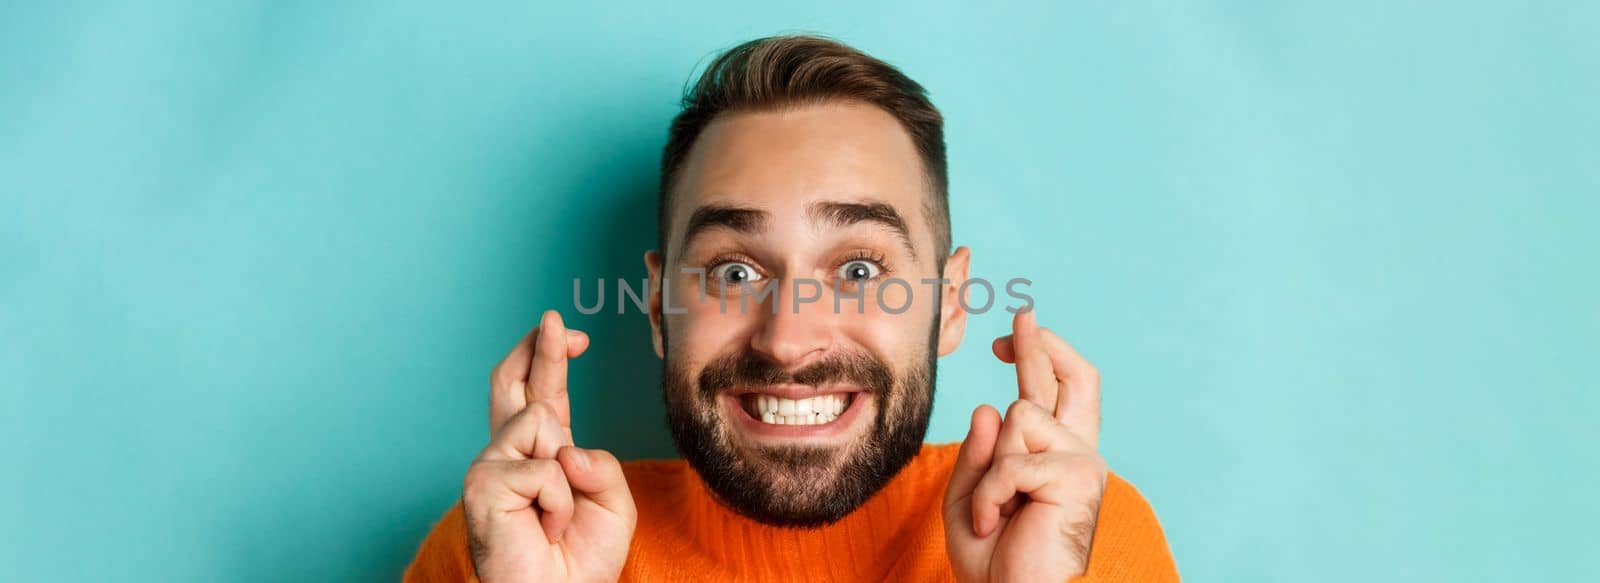 Headshot of hopeful bearded man making a wish, smiling and holding fingers crossed for good luck, standing over light blue background by Benzoix